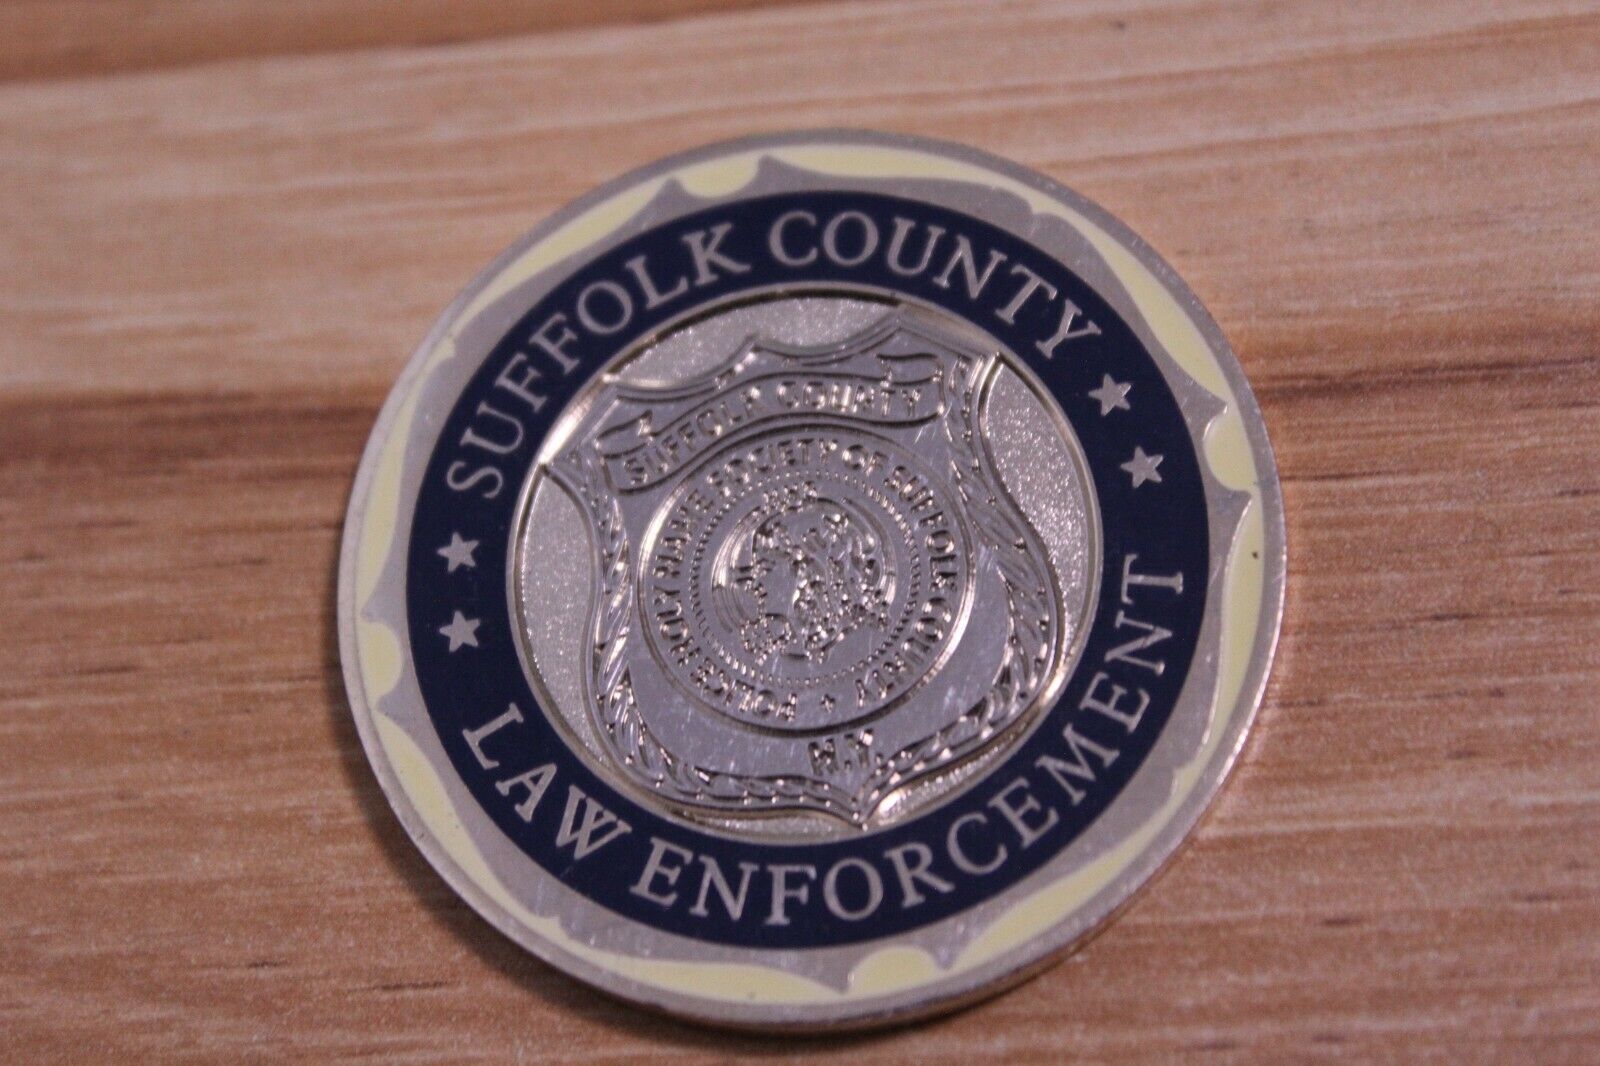 Suffolk County Law Enforcement Challenge Coin